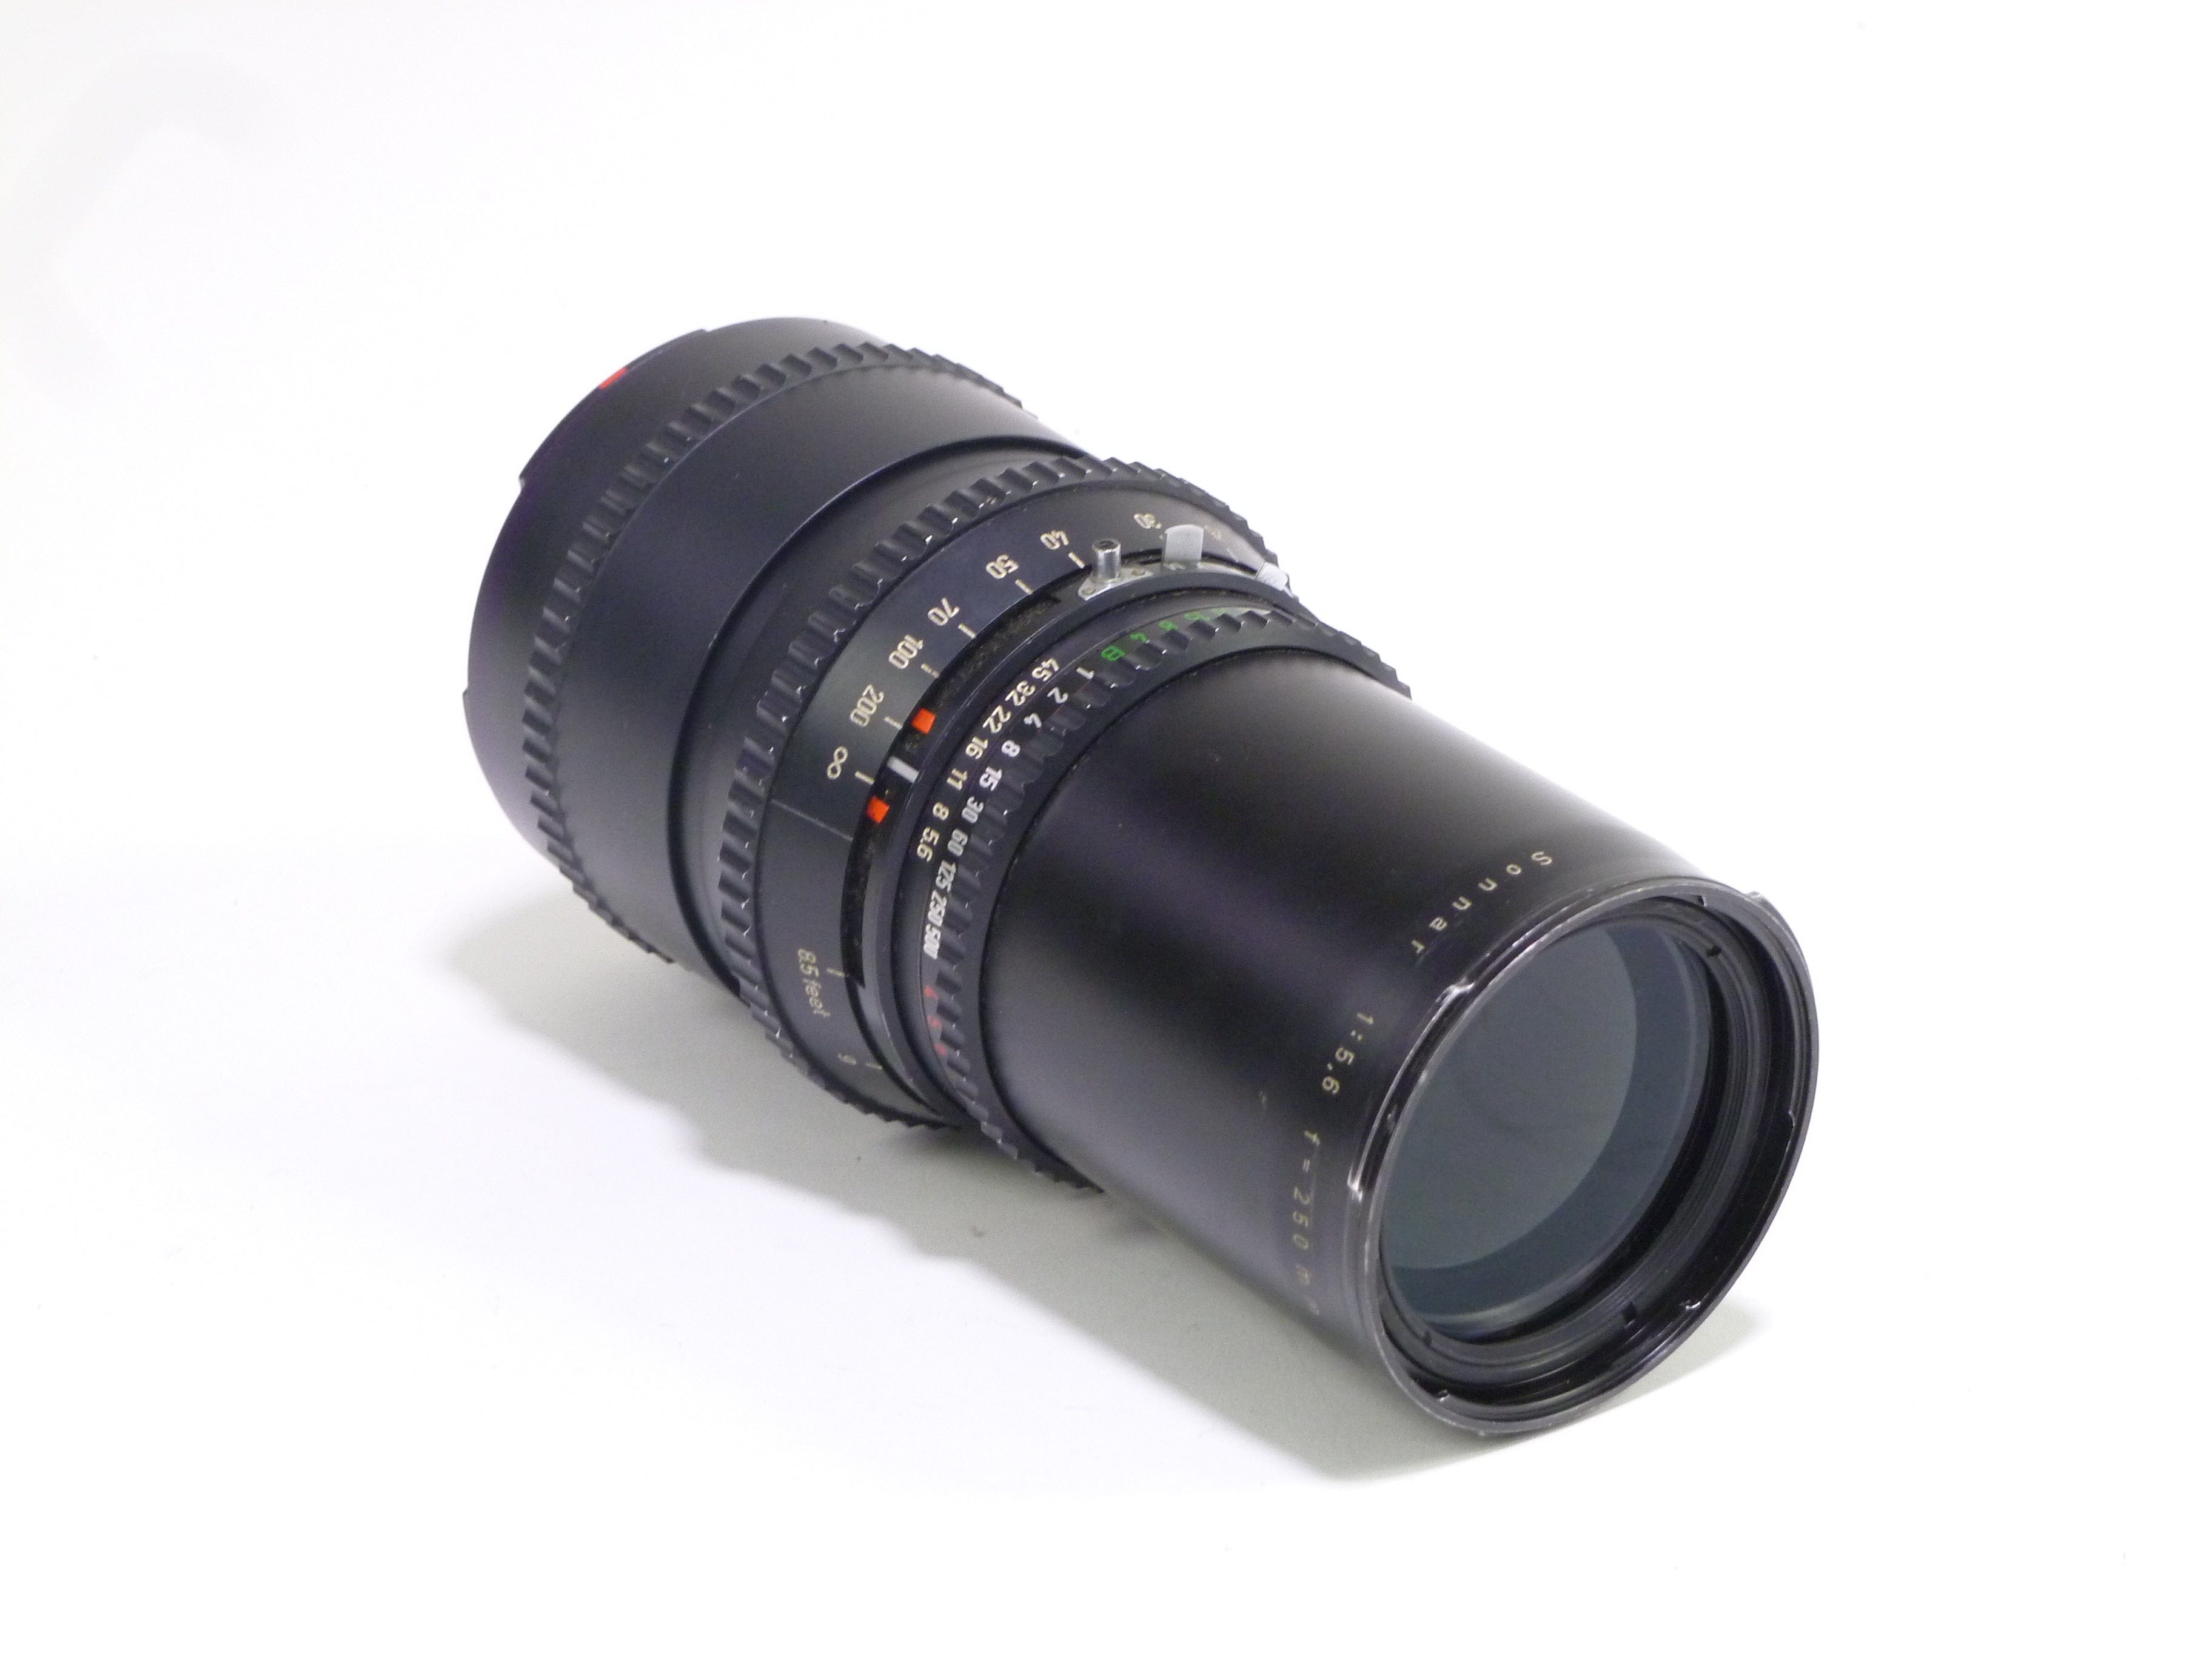 Carl Zeiss Sonnar 250mm F5.6 T* for Hasselblad V - Just CLA'd